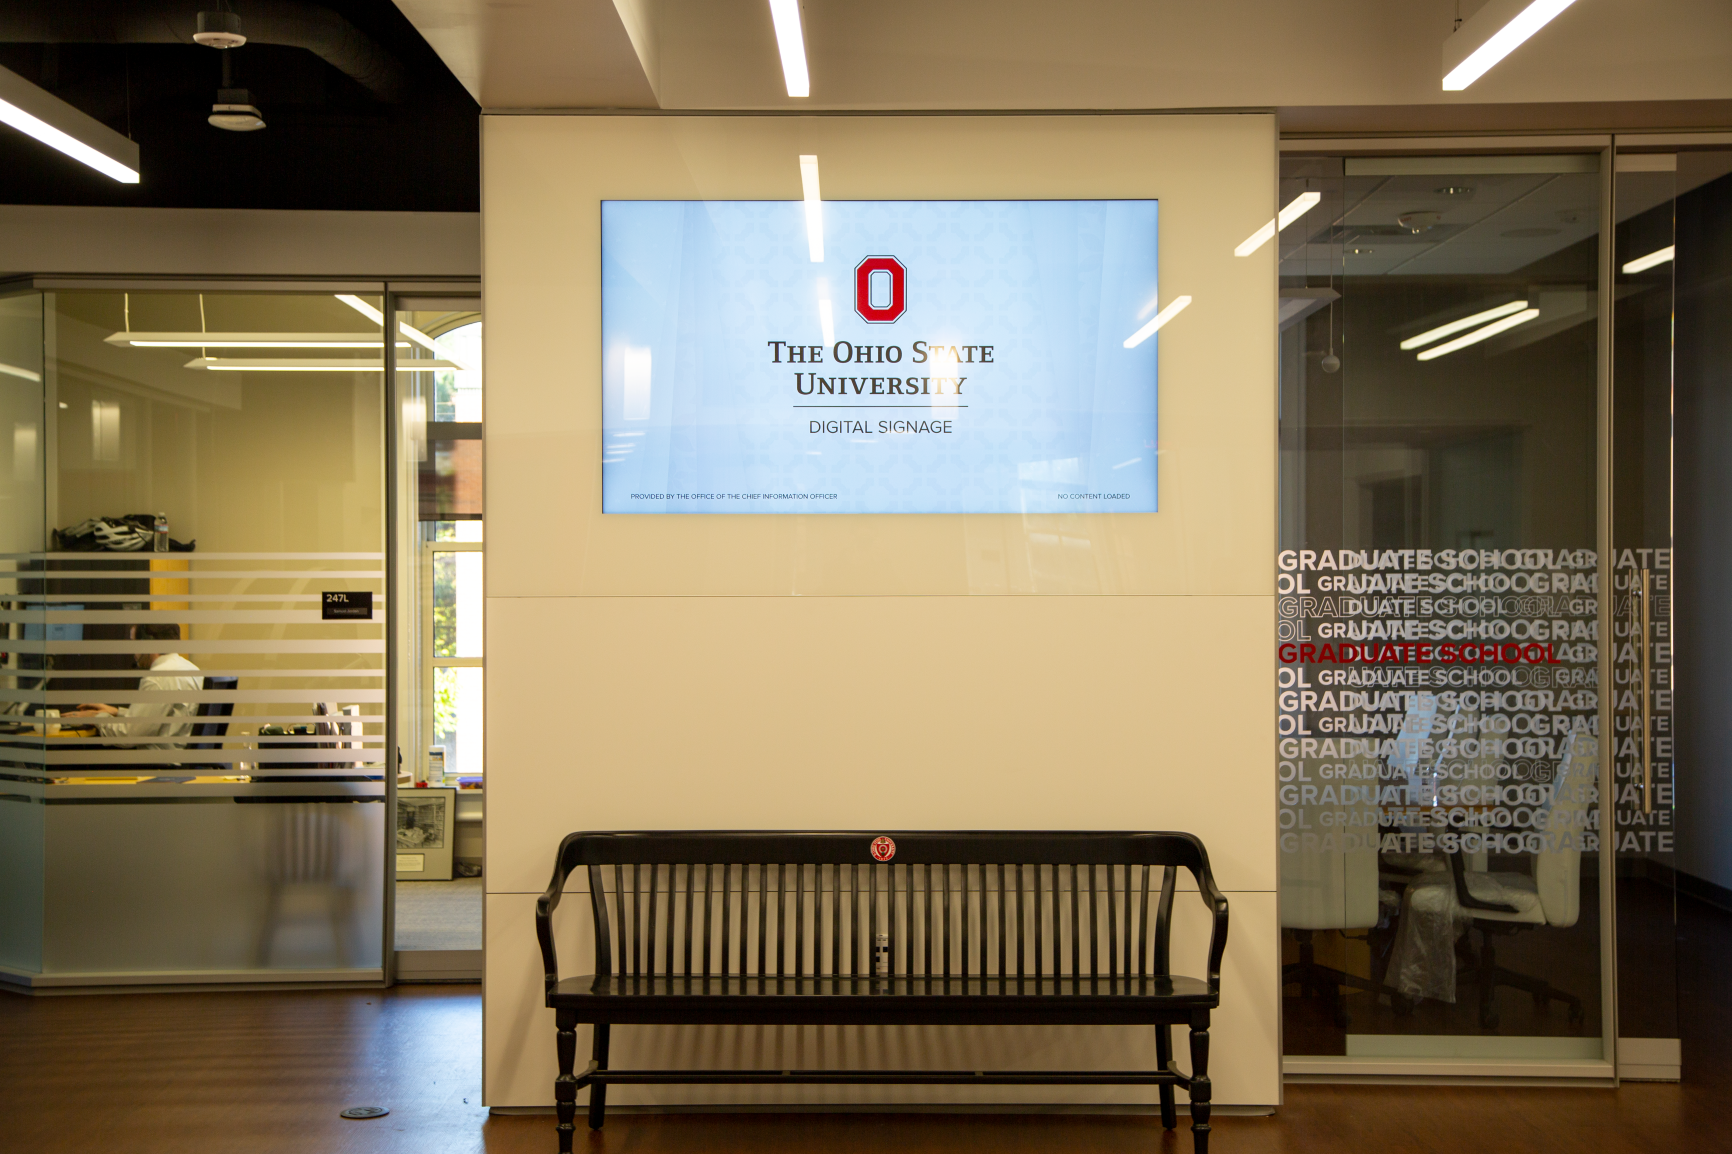 Integrated Technology inside the DIRTT walls shines bright at the Graduate School in University Hall at The Ohio State University by Continental Office